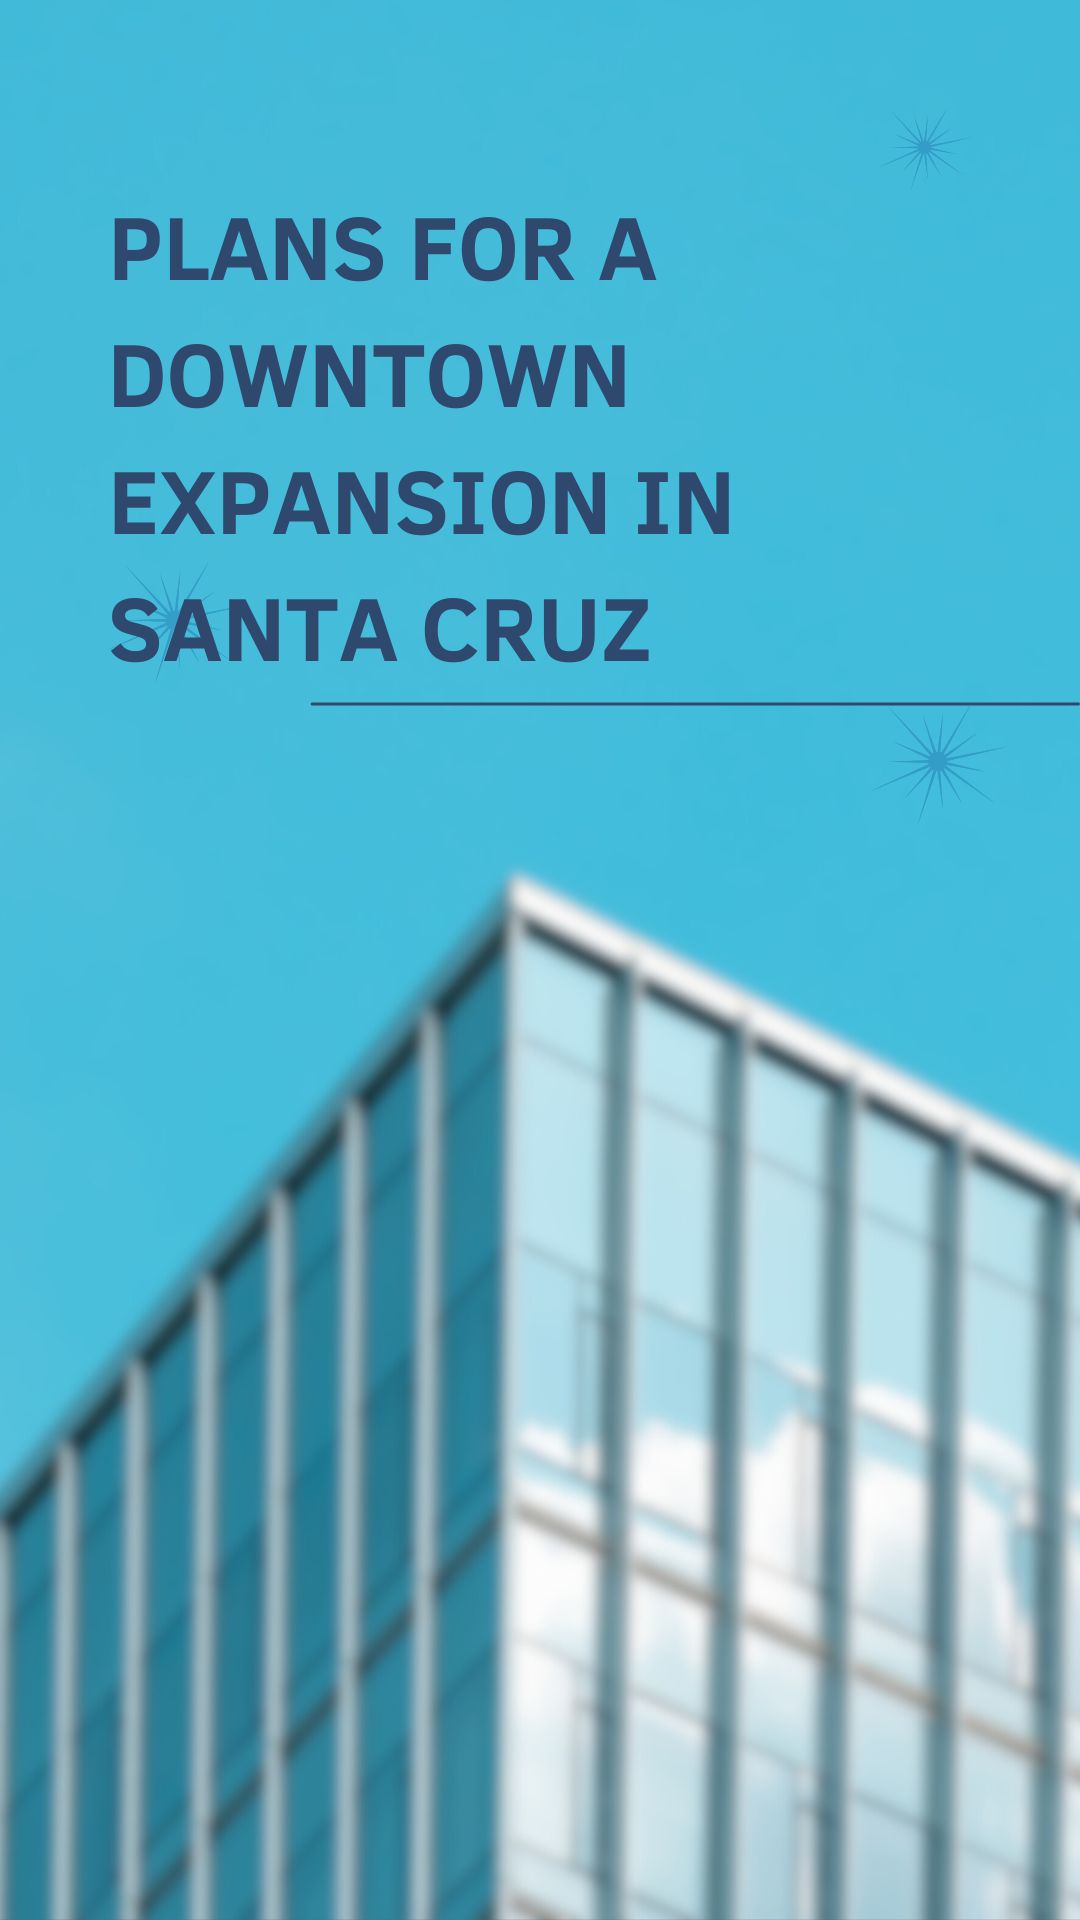 Plans for a Downtown Expansion in Santa Cruz